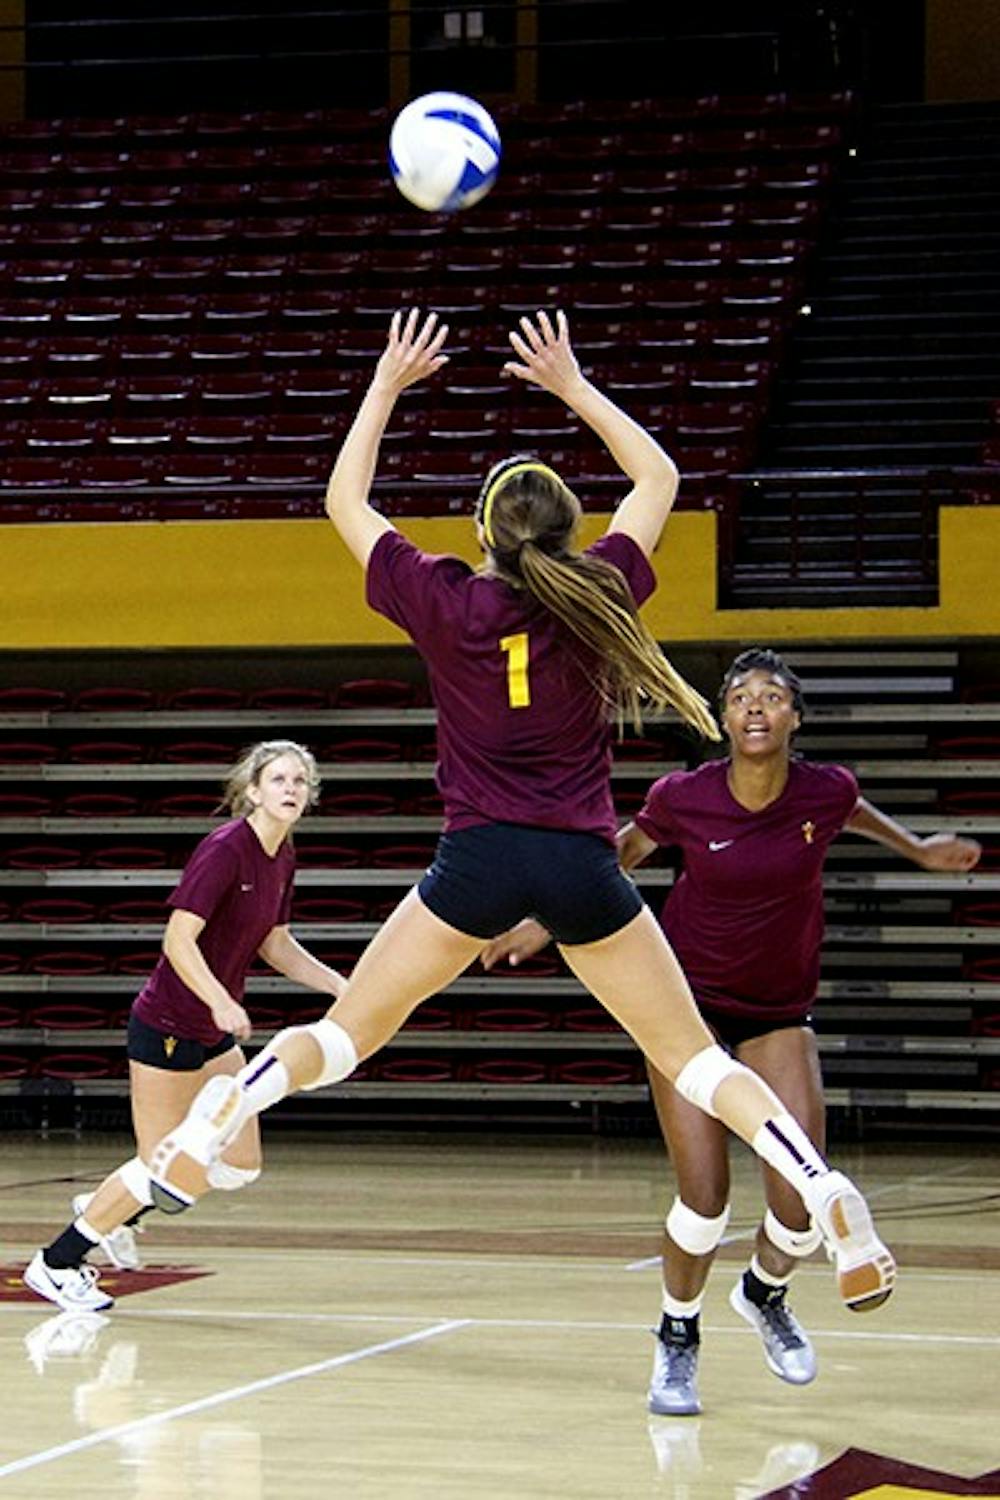 Junior setter Bianca Arellano sets the ball for her teammates during the ASU Girl’s Volleyball Maroon and Gold Scrimmage on Aug. 23 at Wells Fargo Arena. (Photo by Becca Smouse)